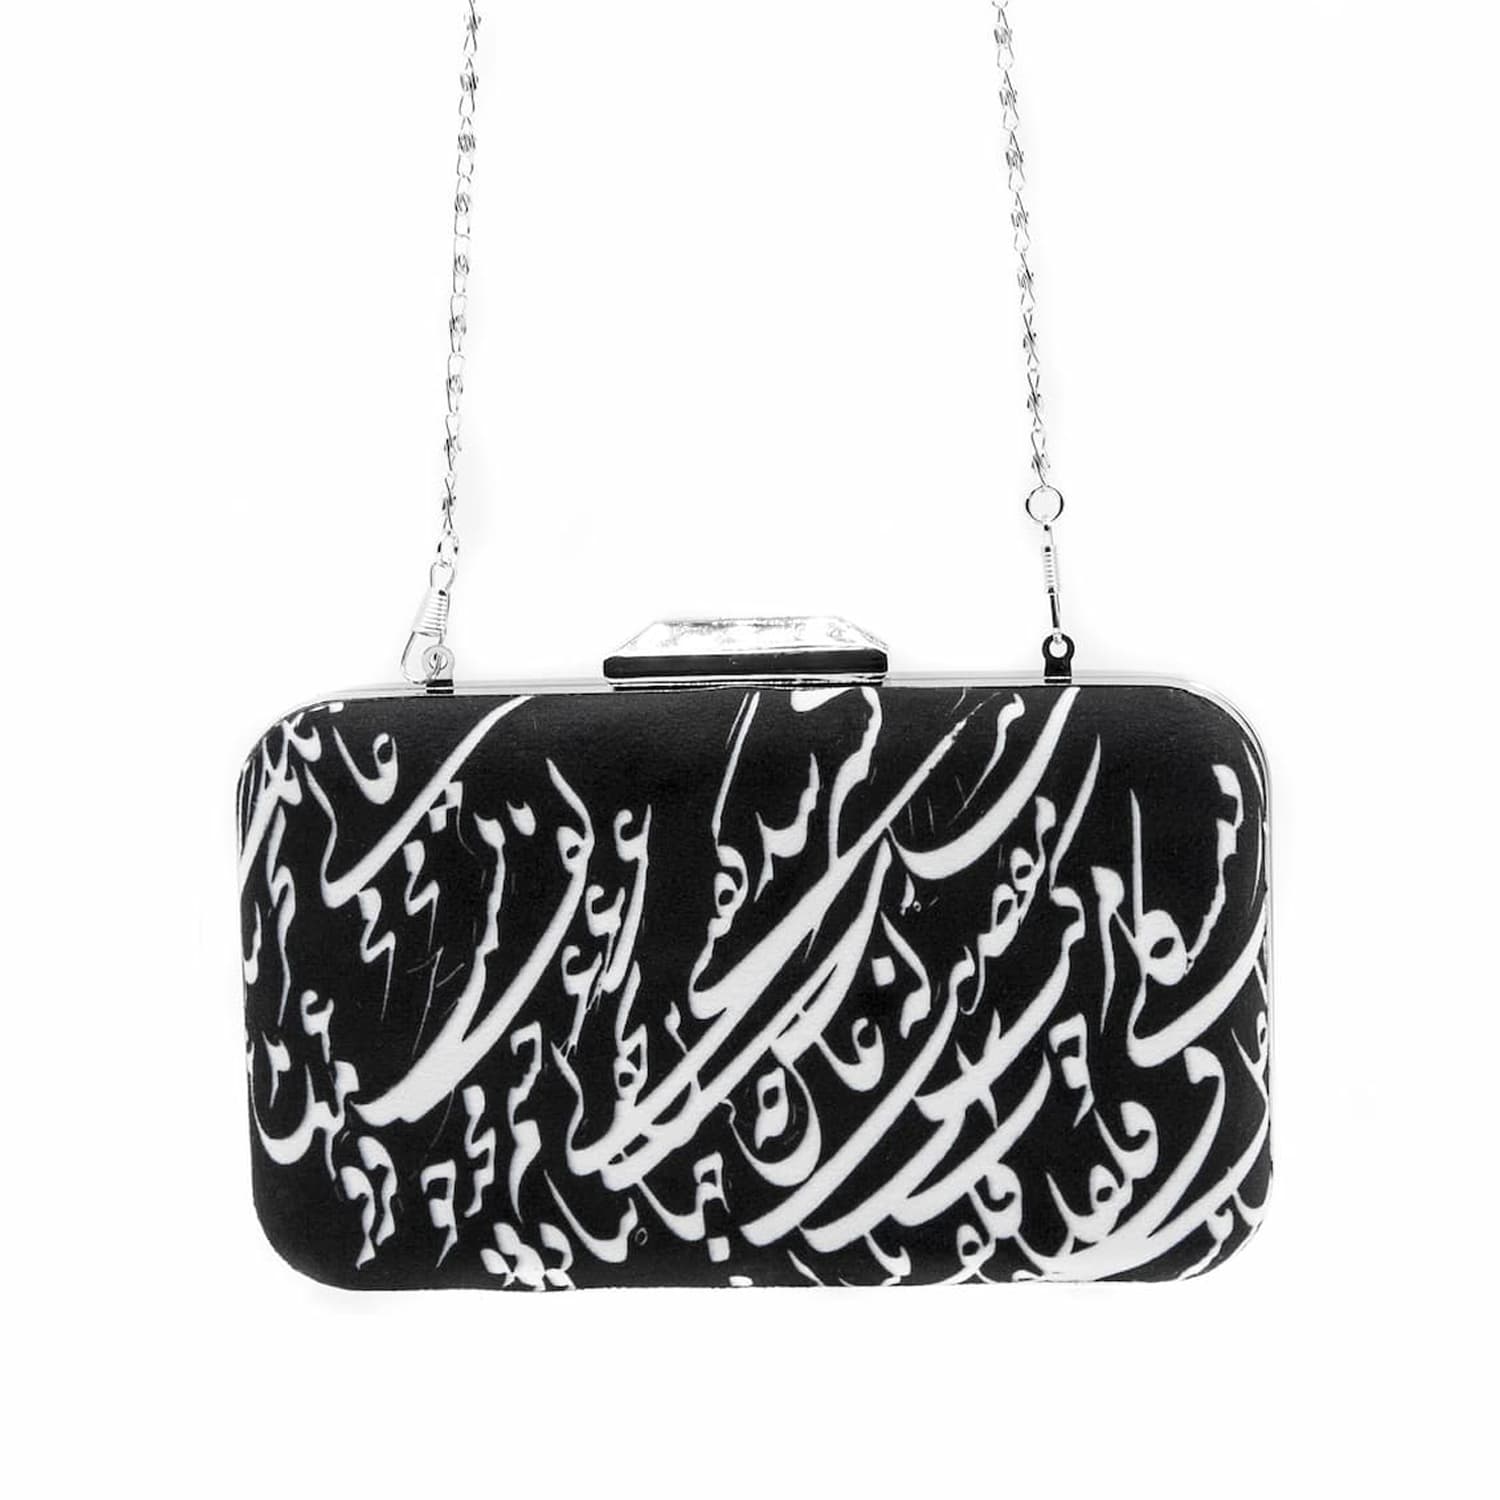 Persian Calligraphy Clutch